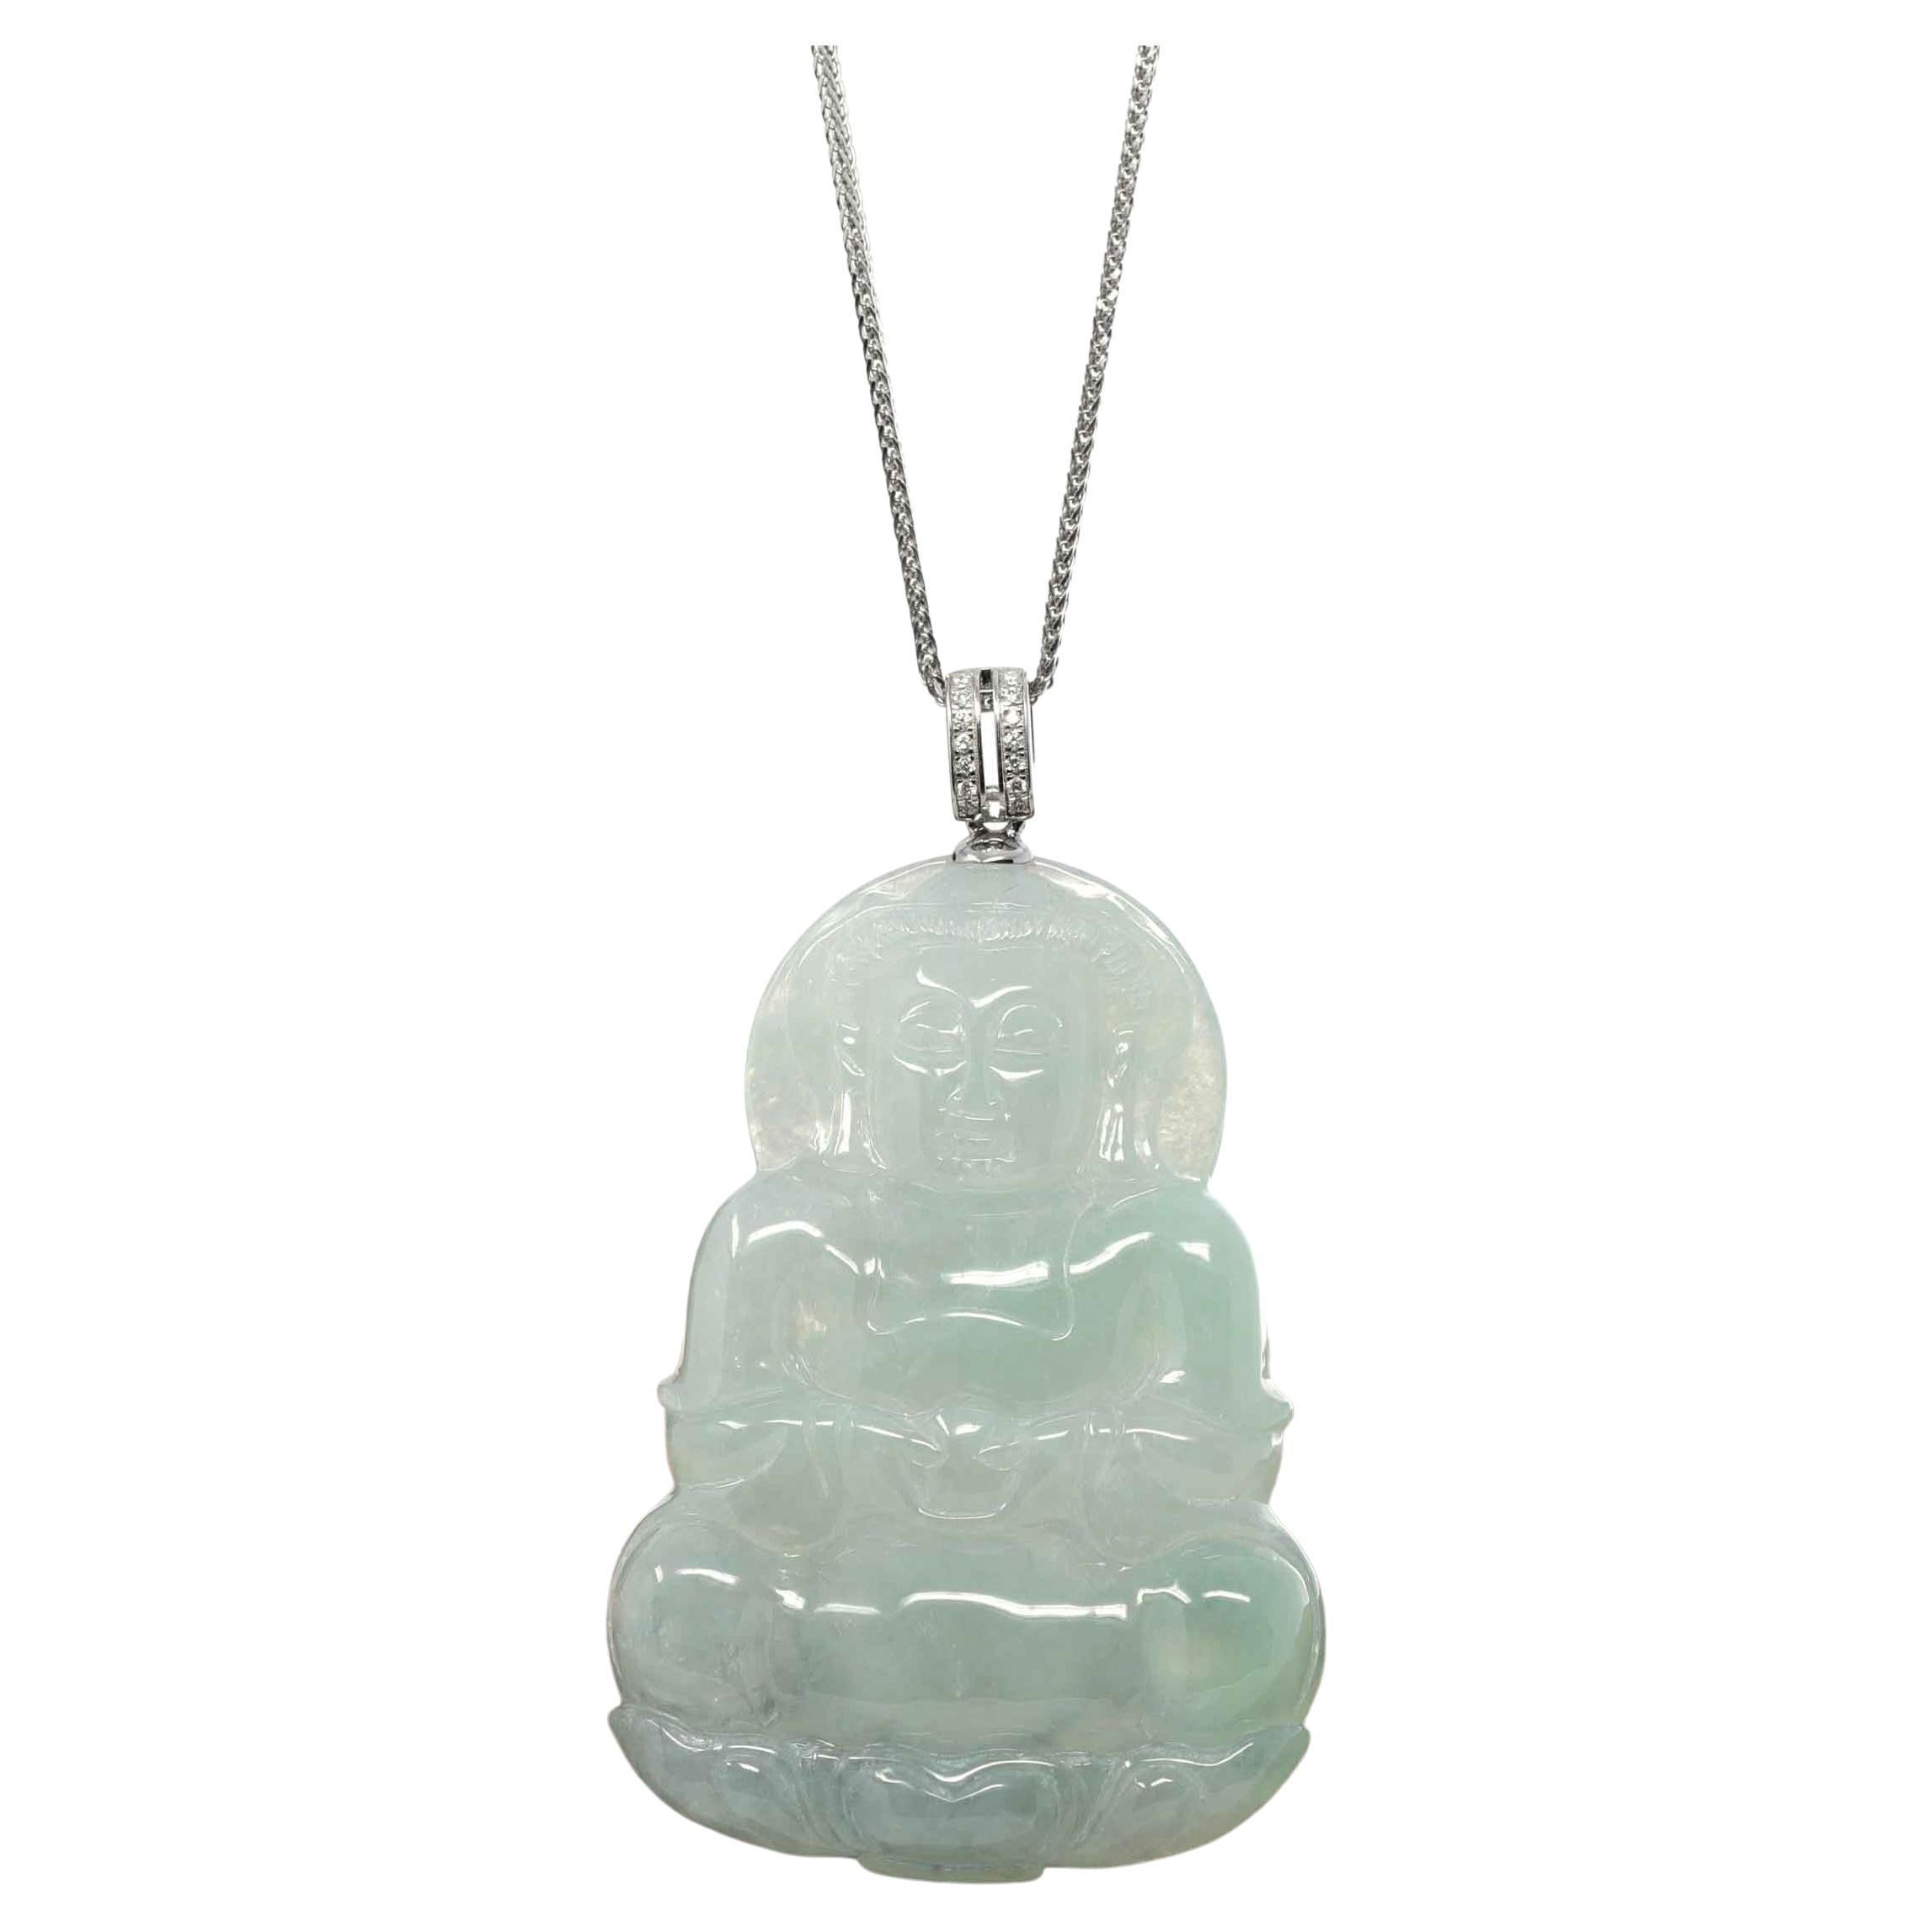 "Goddess of Compassion" Burmese Jadeite Jade Guanyin Pendant with 14k White Gold For Sale